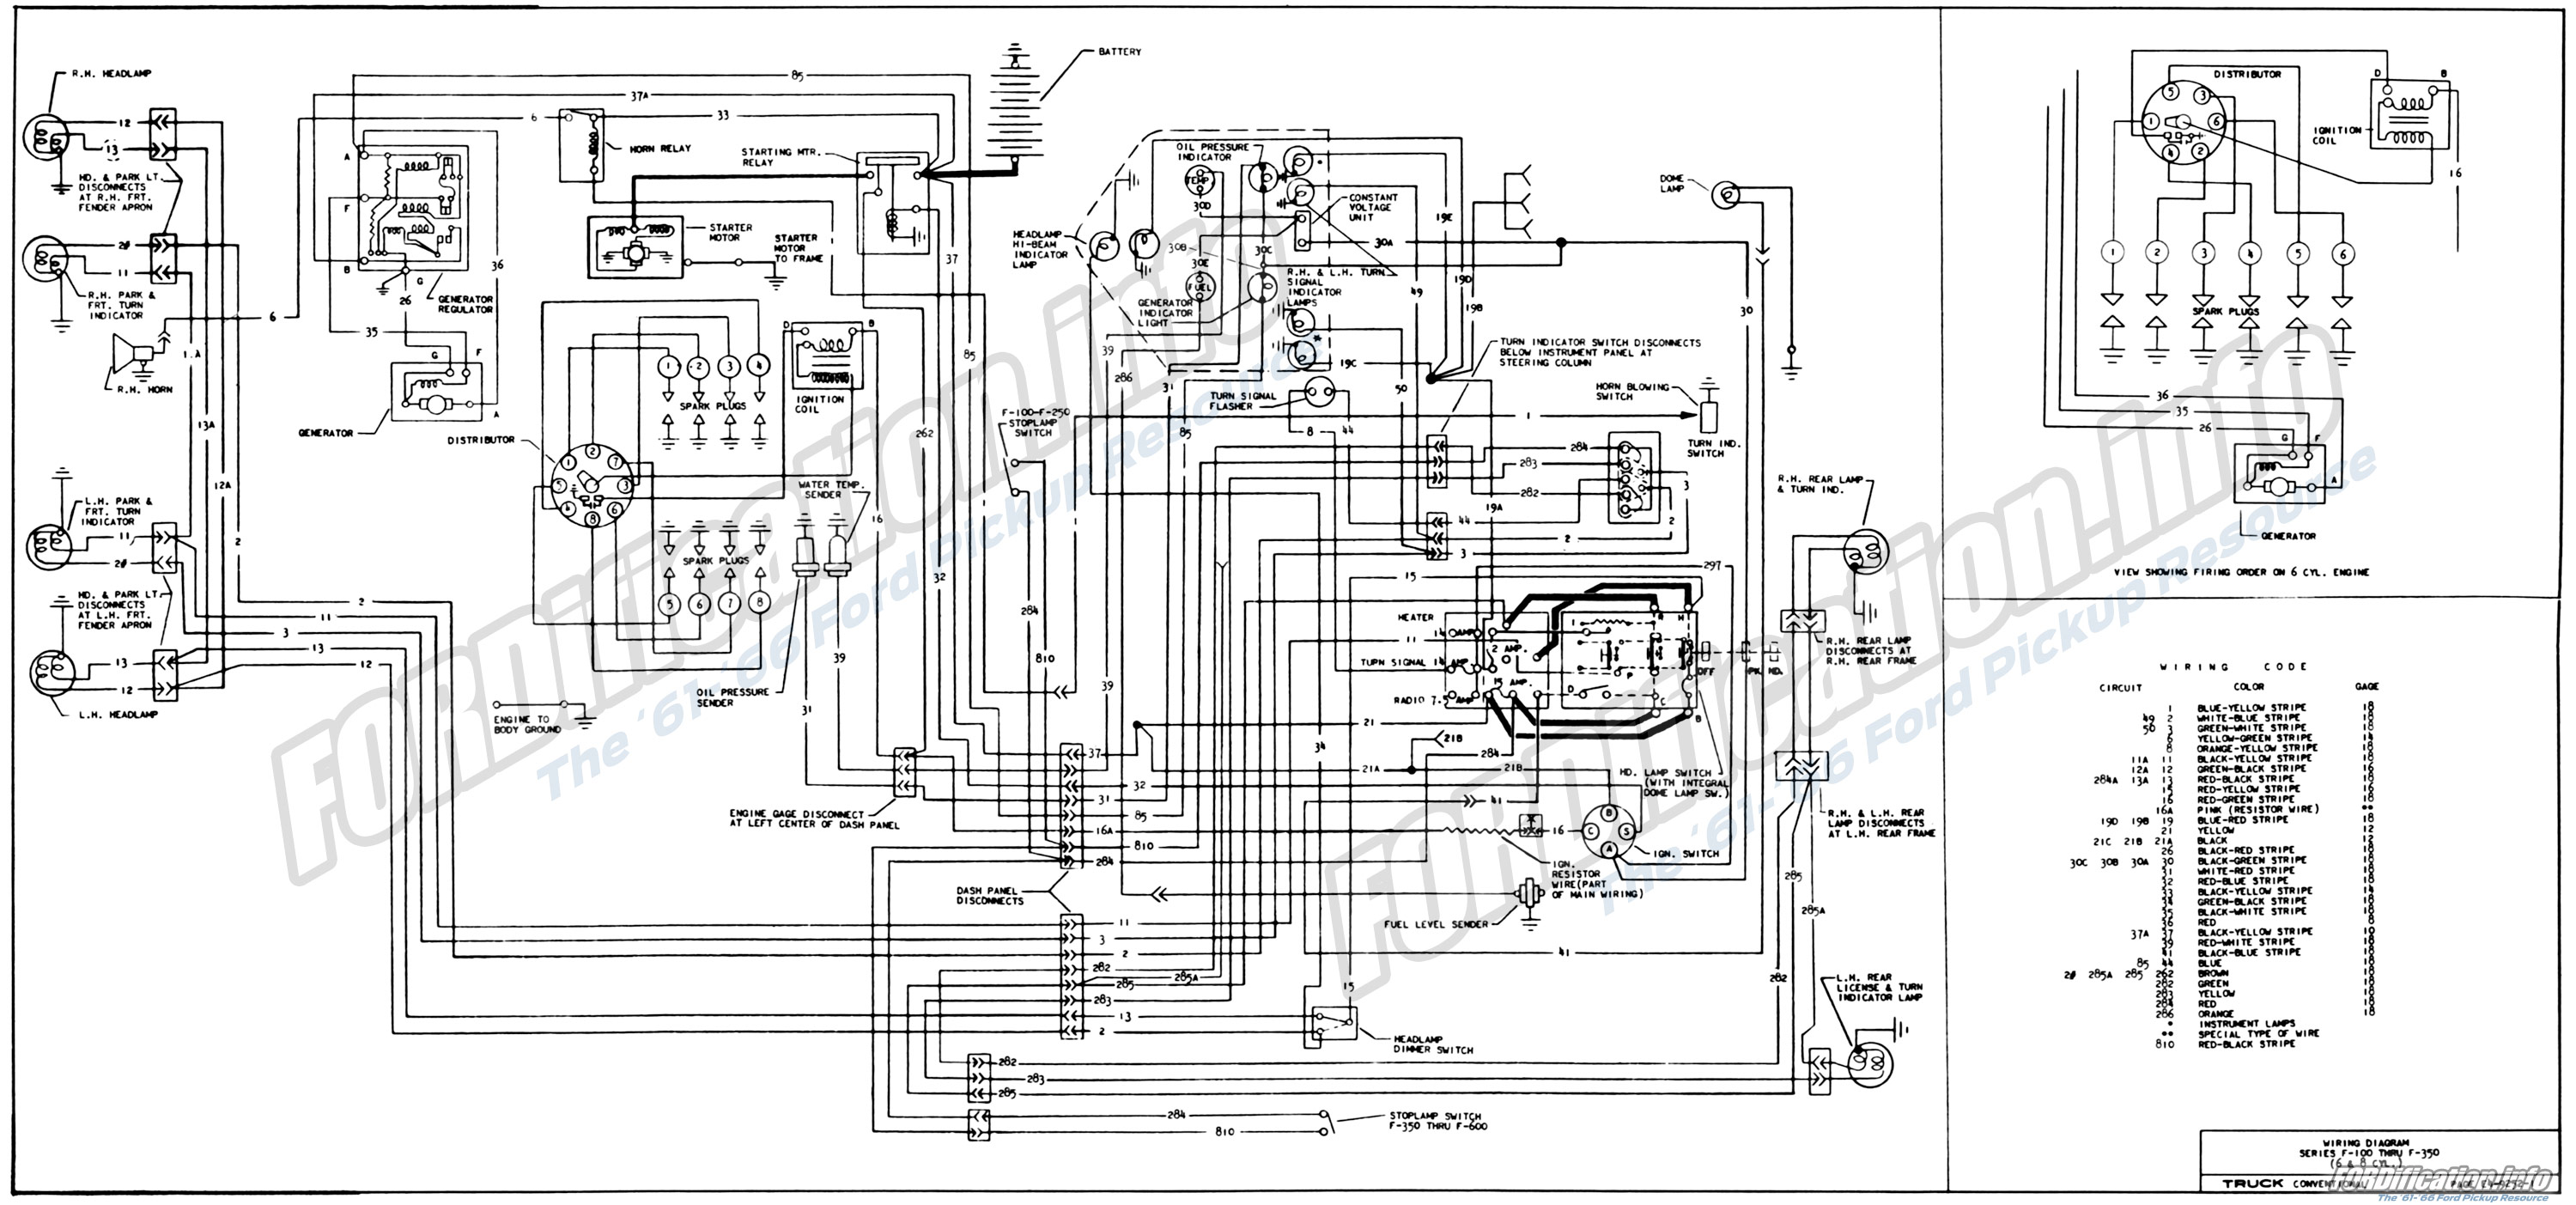 1964 Ford Truck Wiring Diagrams - FORDification.info - The ... 1964 ford tractor wiring diagram 